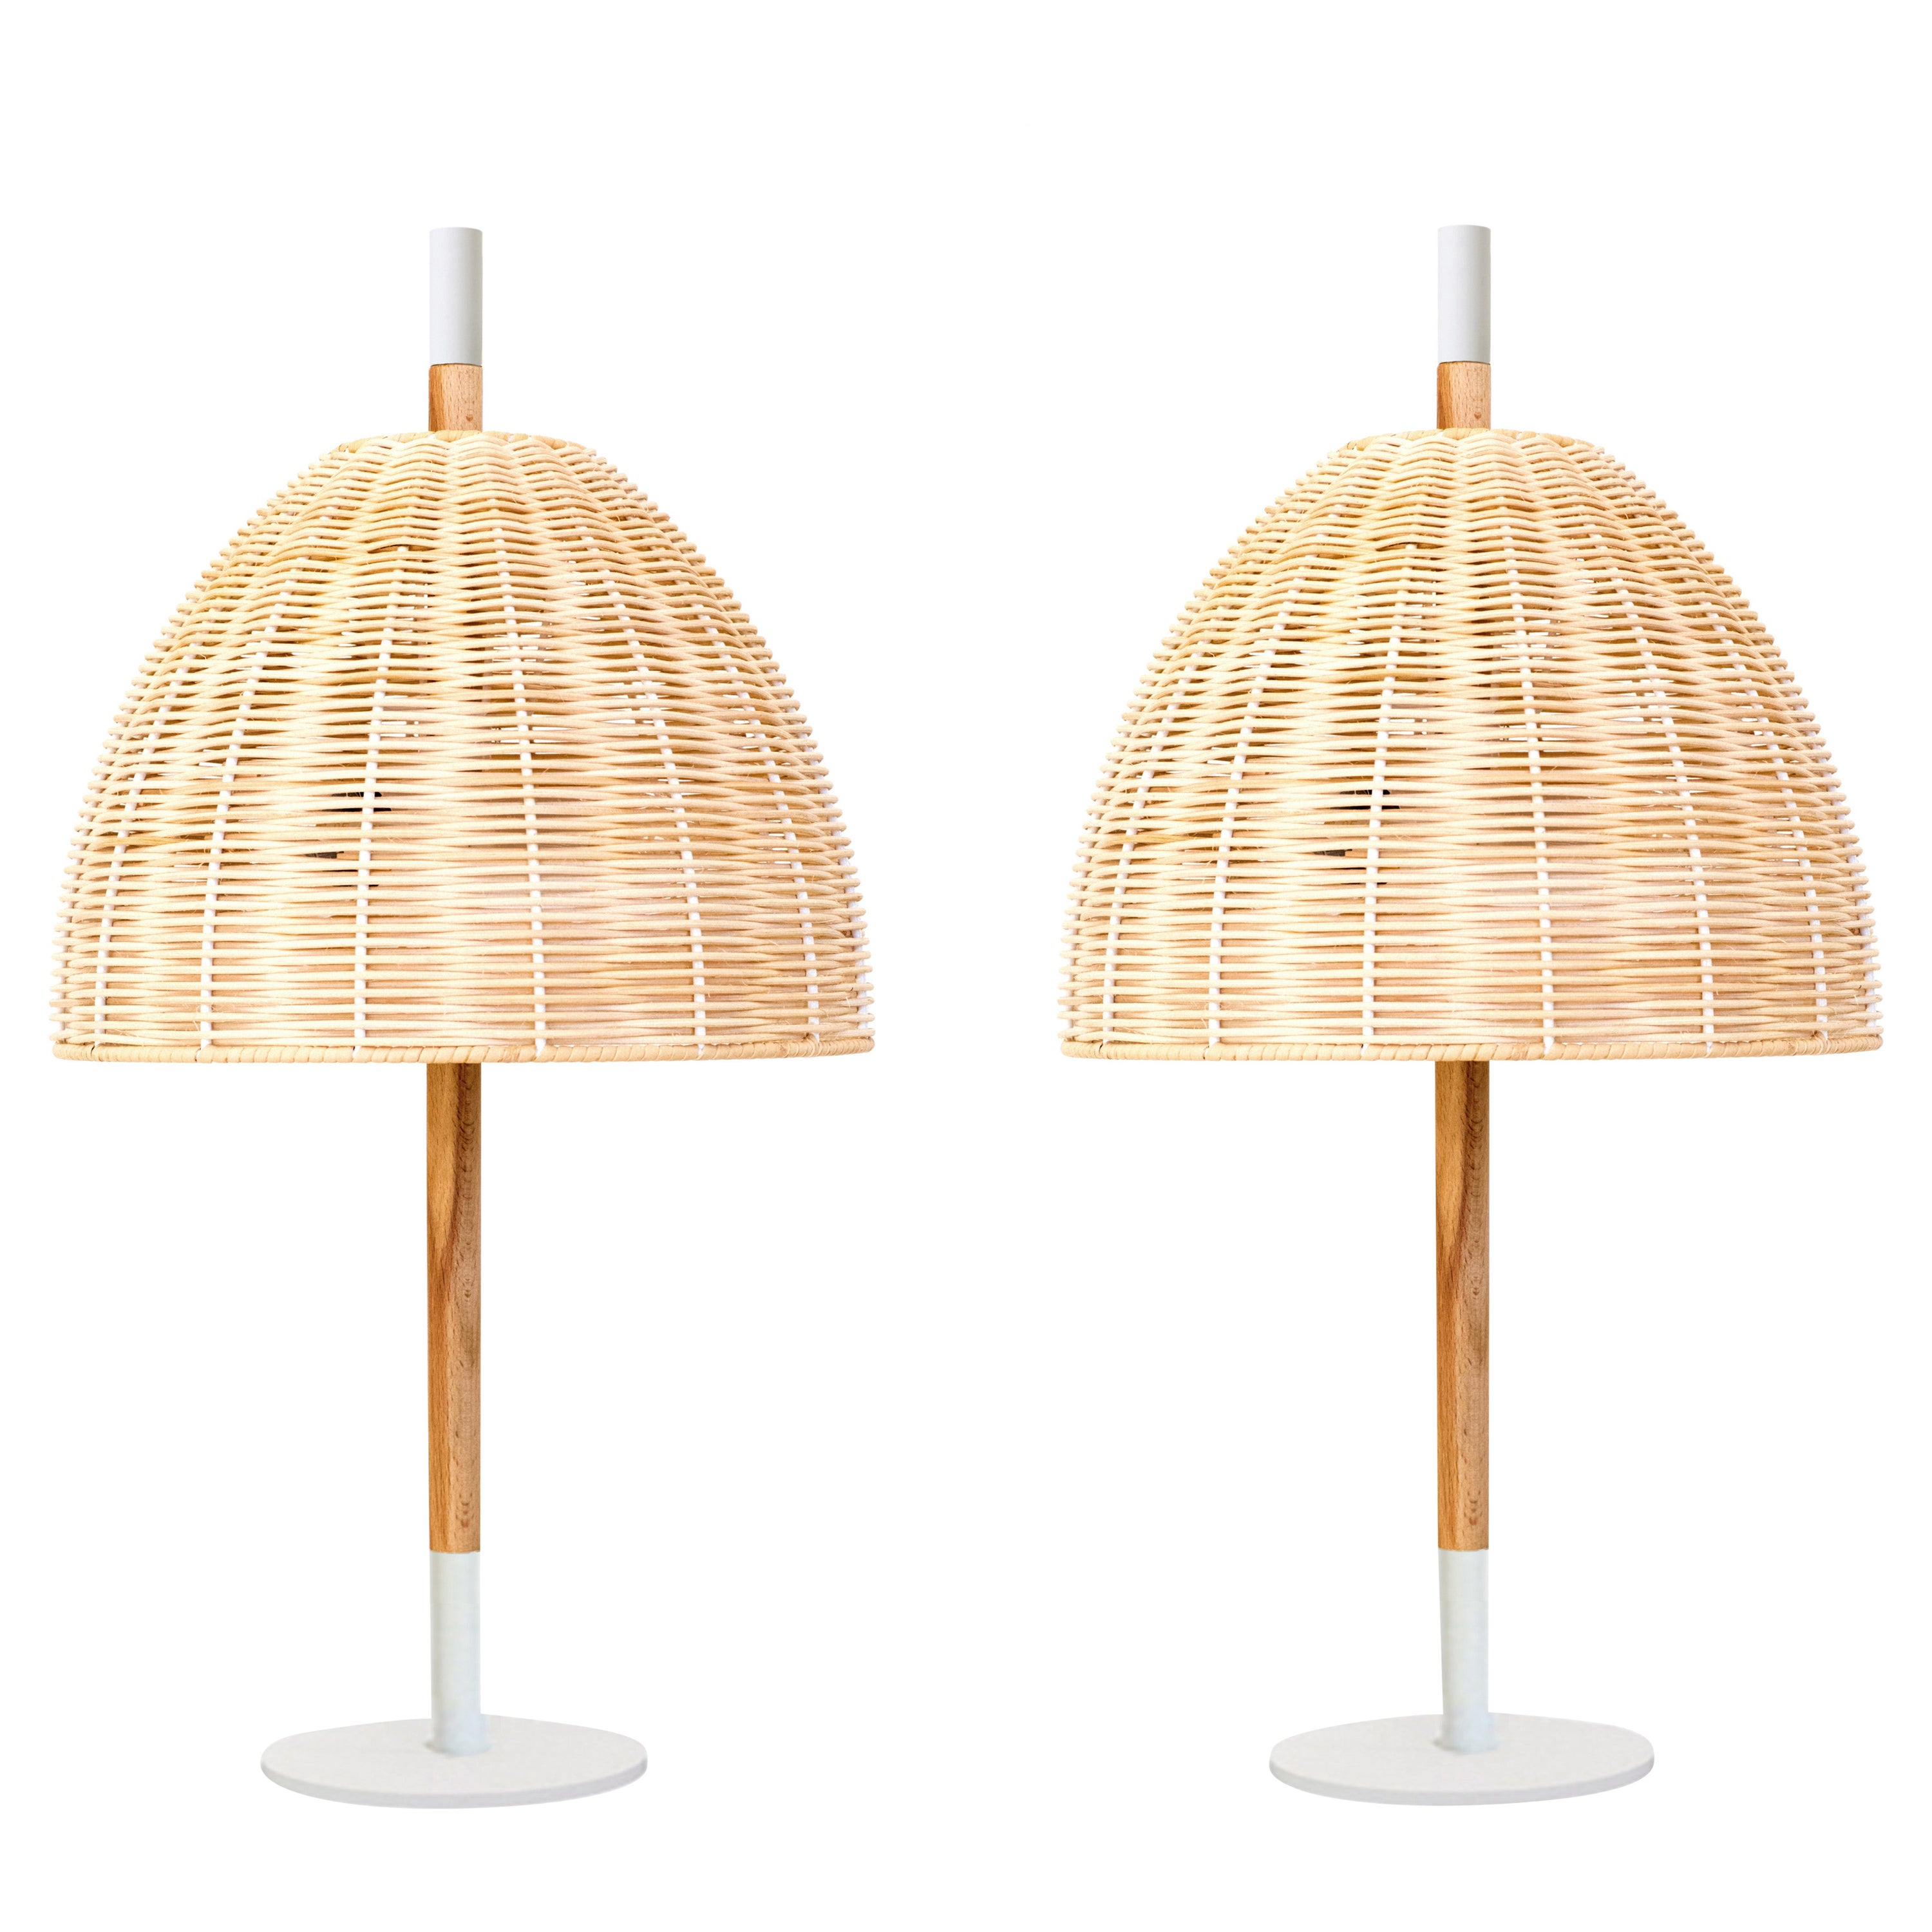 Pair of, Handmade, Table Lamp, Natural Rattan White, by Mediterranean Objects For Sale